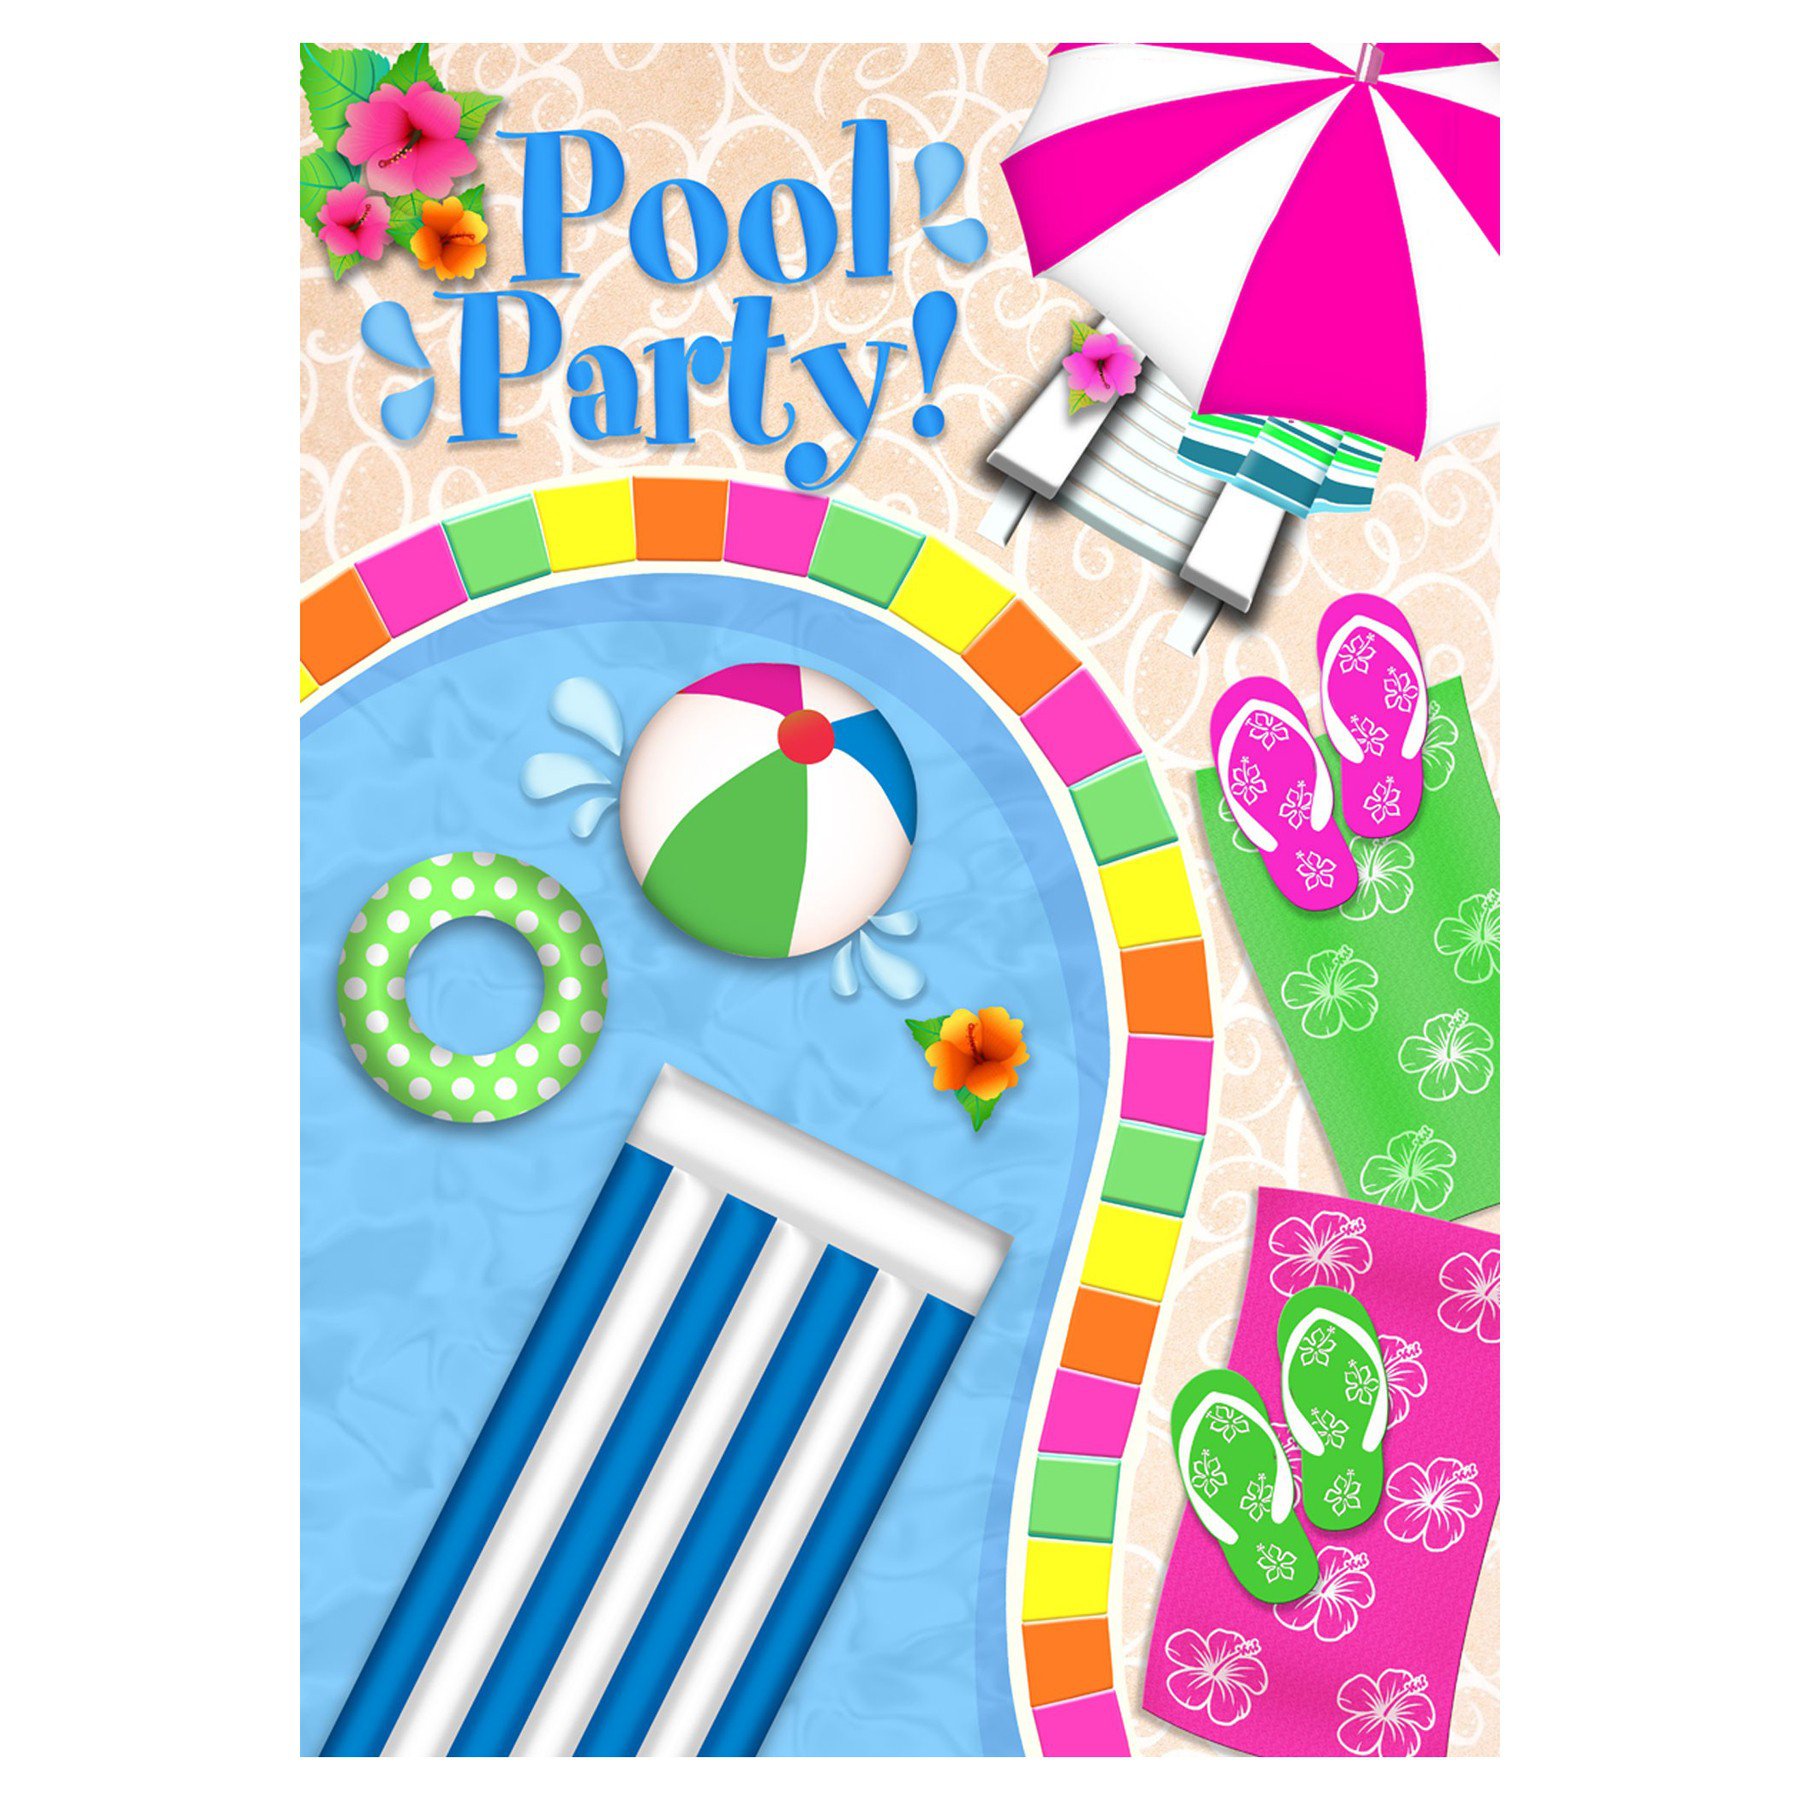 Pool Party Clip Art Pictures